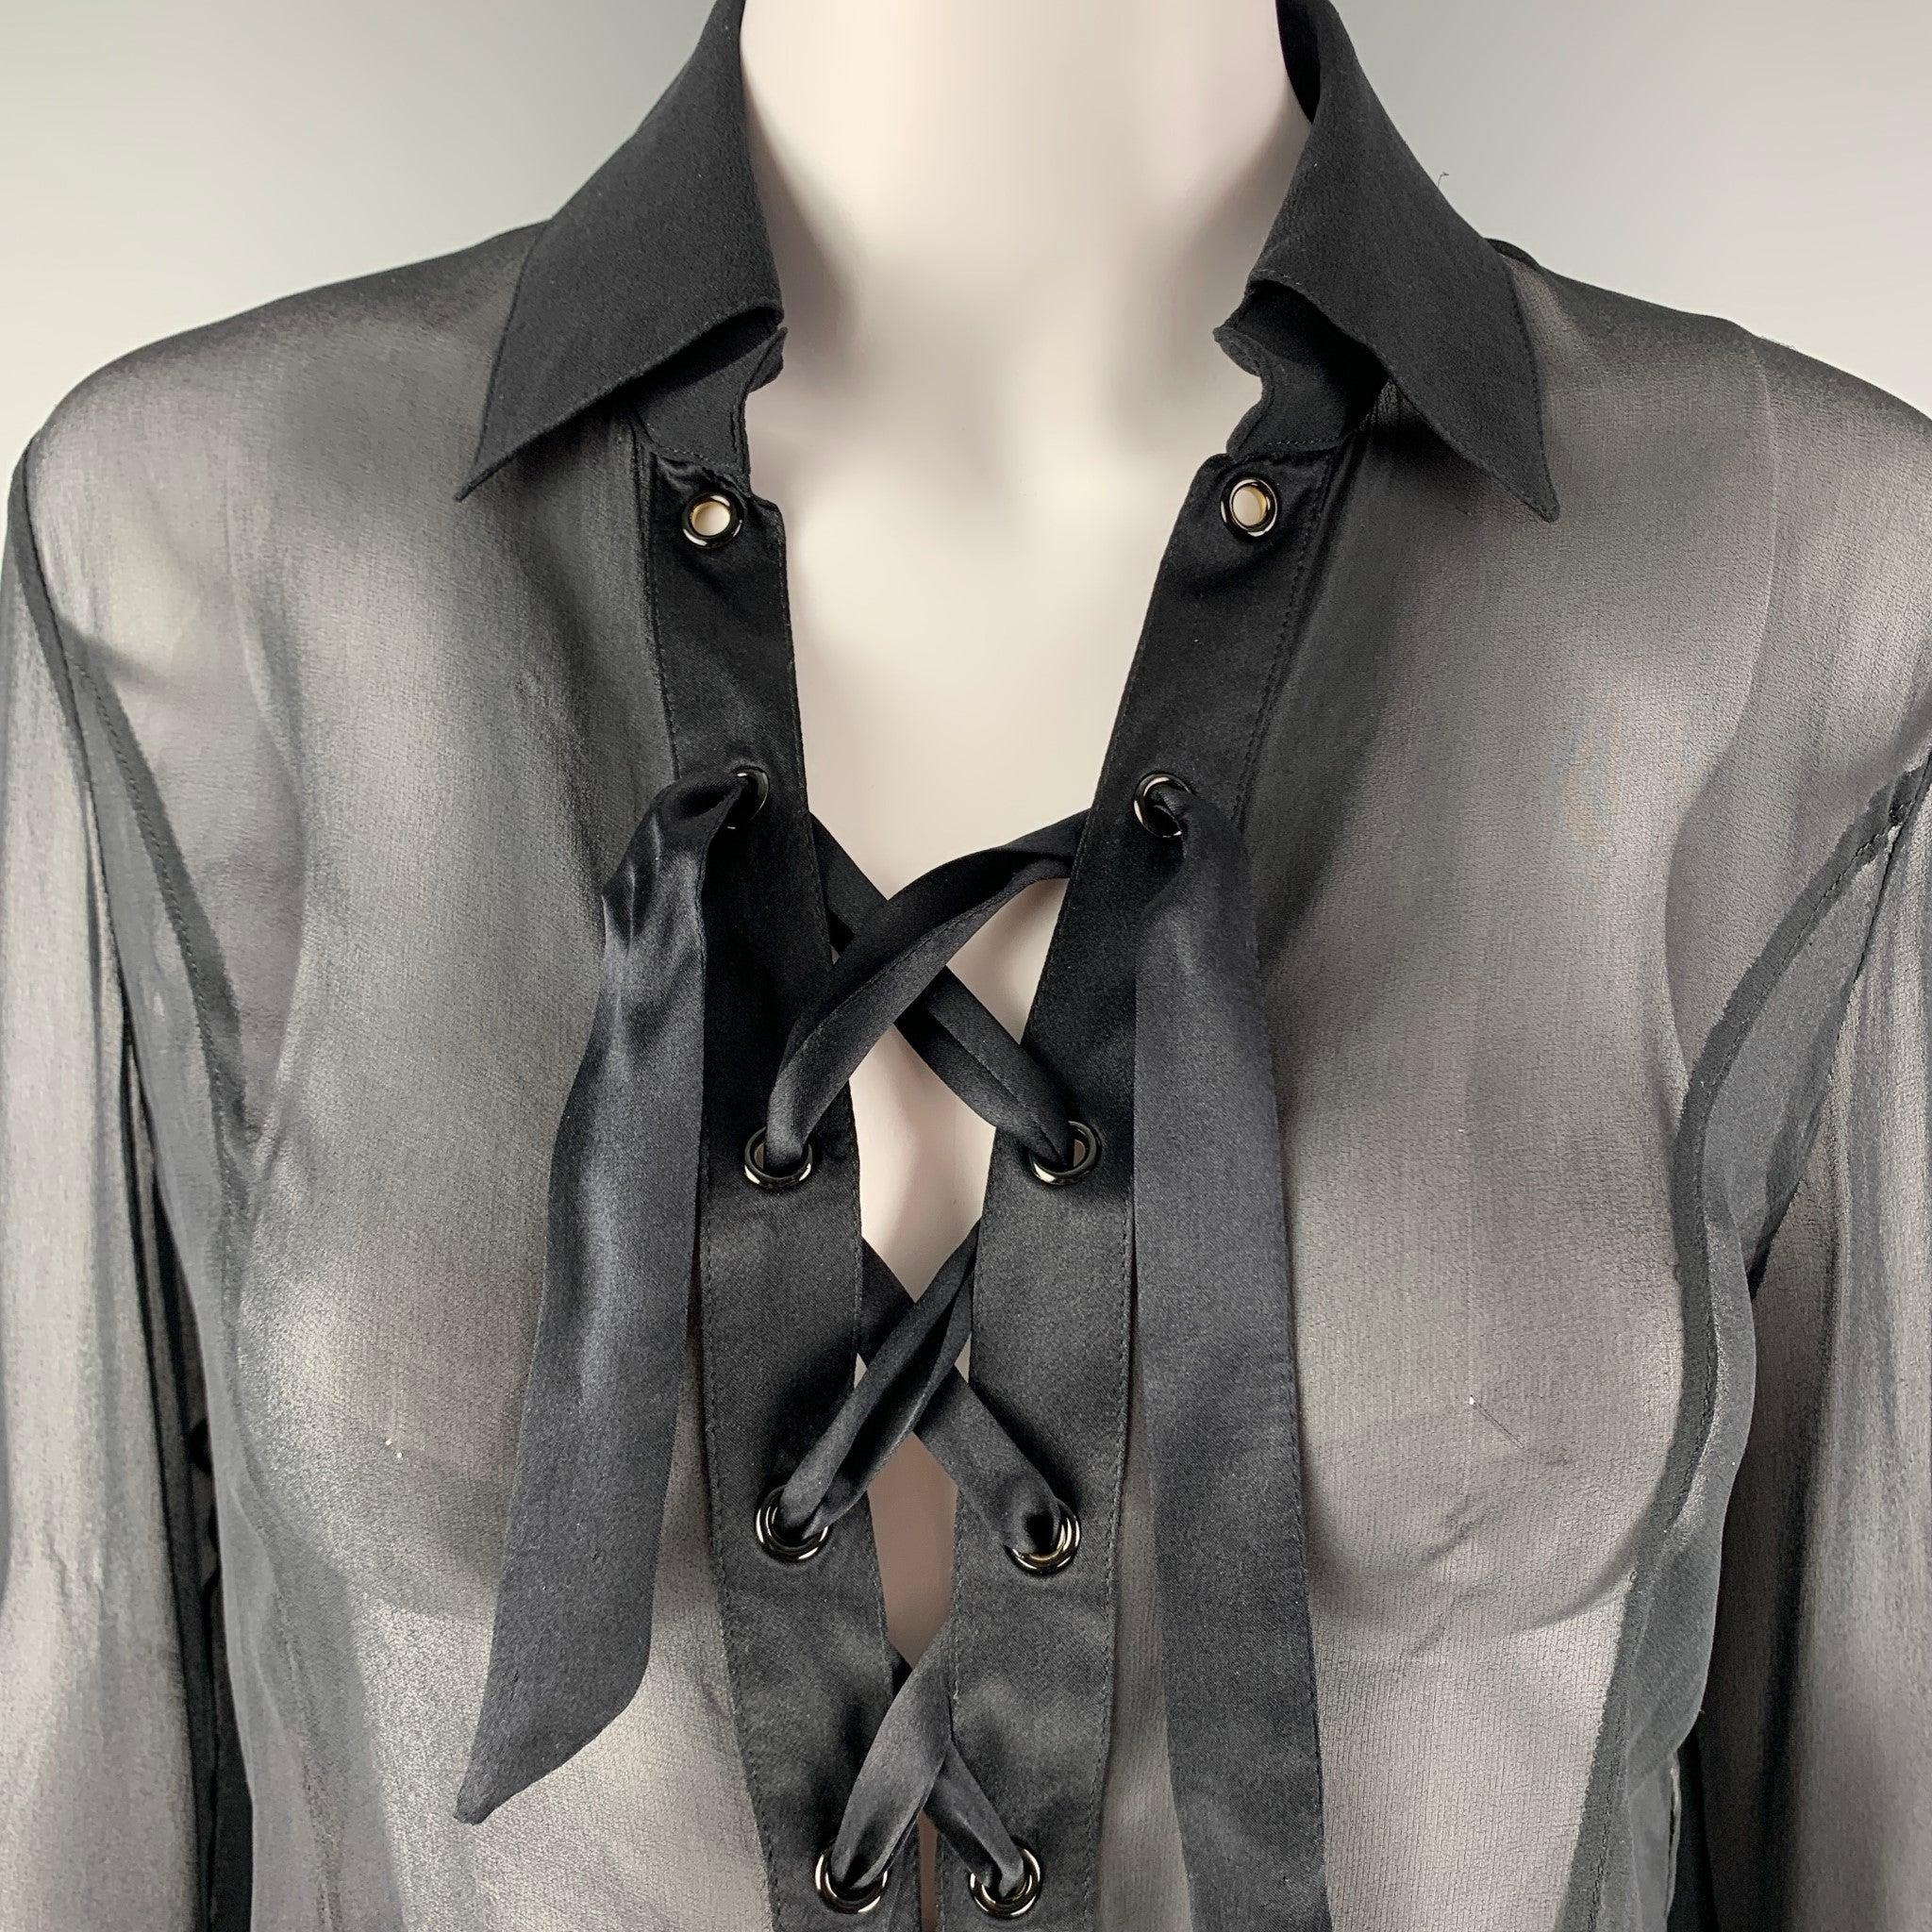 VALENTINO Roma long sleeves shirt comes in black silk woven material featuring a see through style, straight collar, laced front detail, and rivets detail at sleeve. Made in Italy.Excellent Pre-Owned Condition. Minor signs of wear. Missing Button